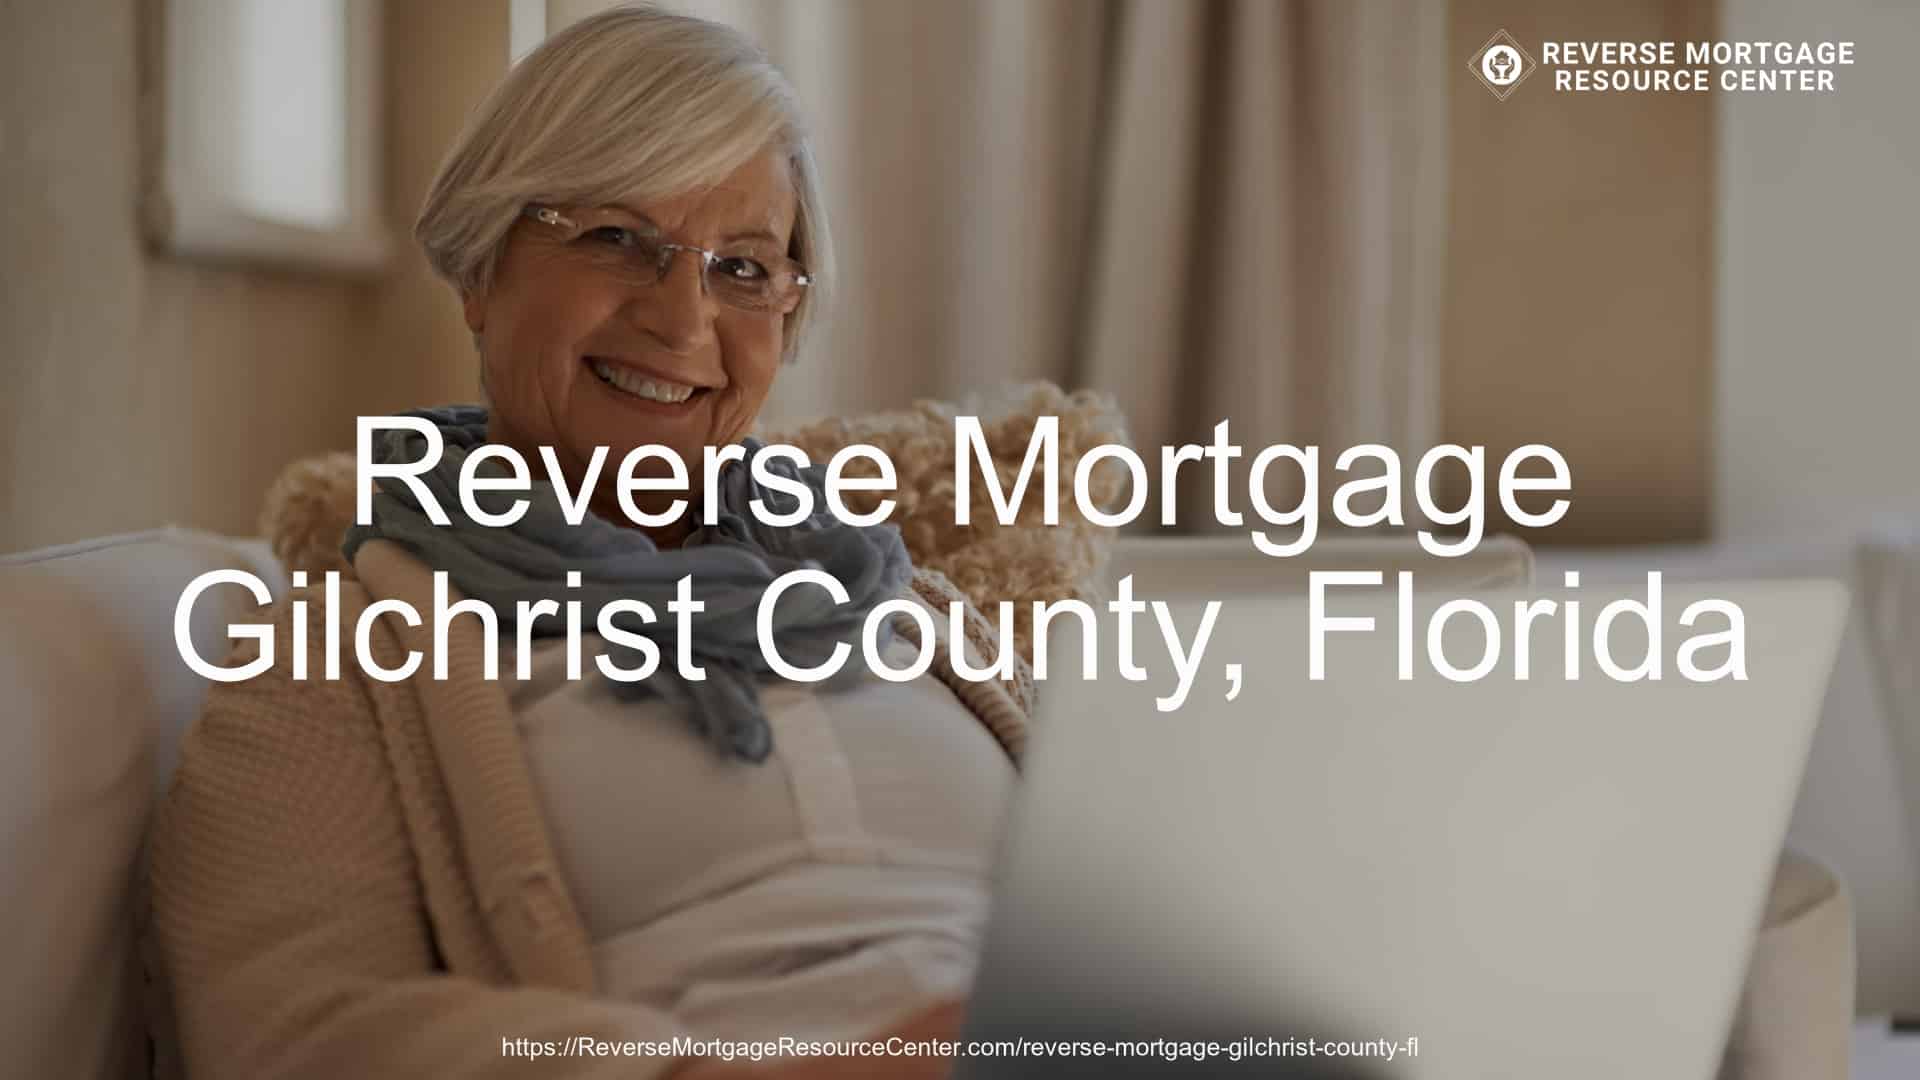 Reverse Mortgage Loans in Gilchrist County Florida